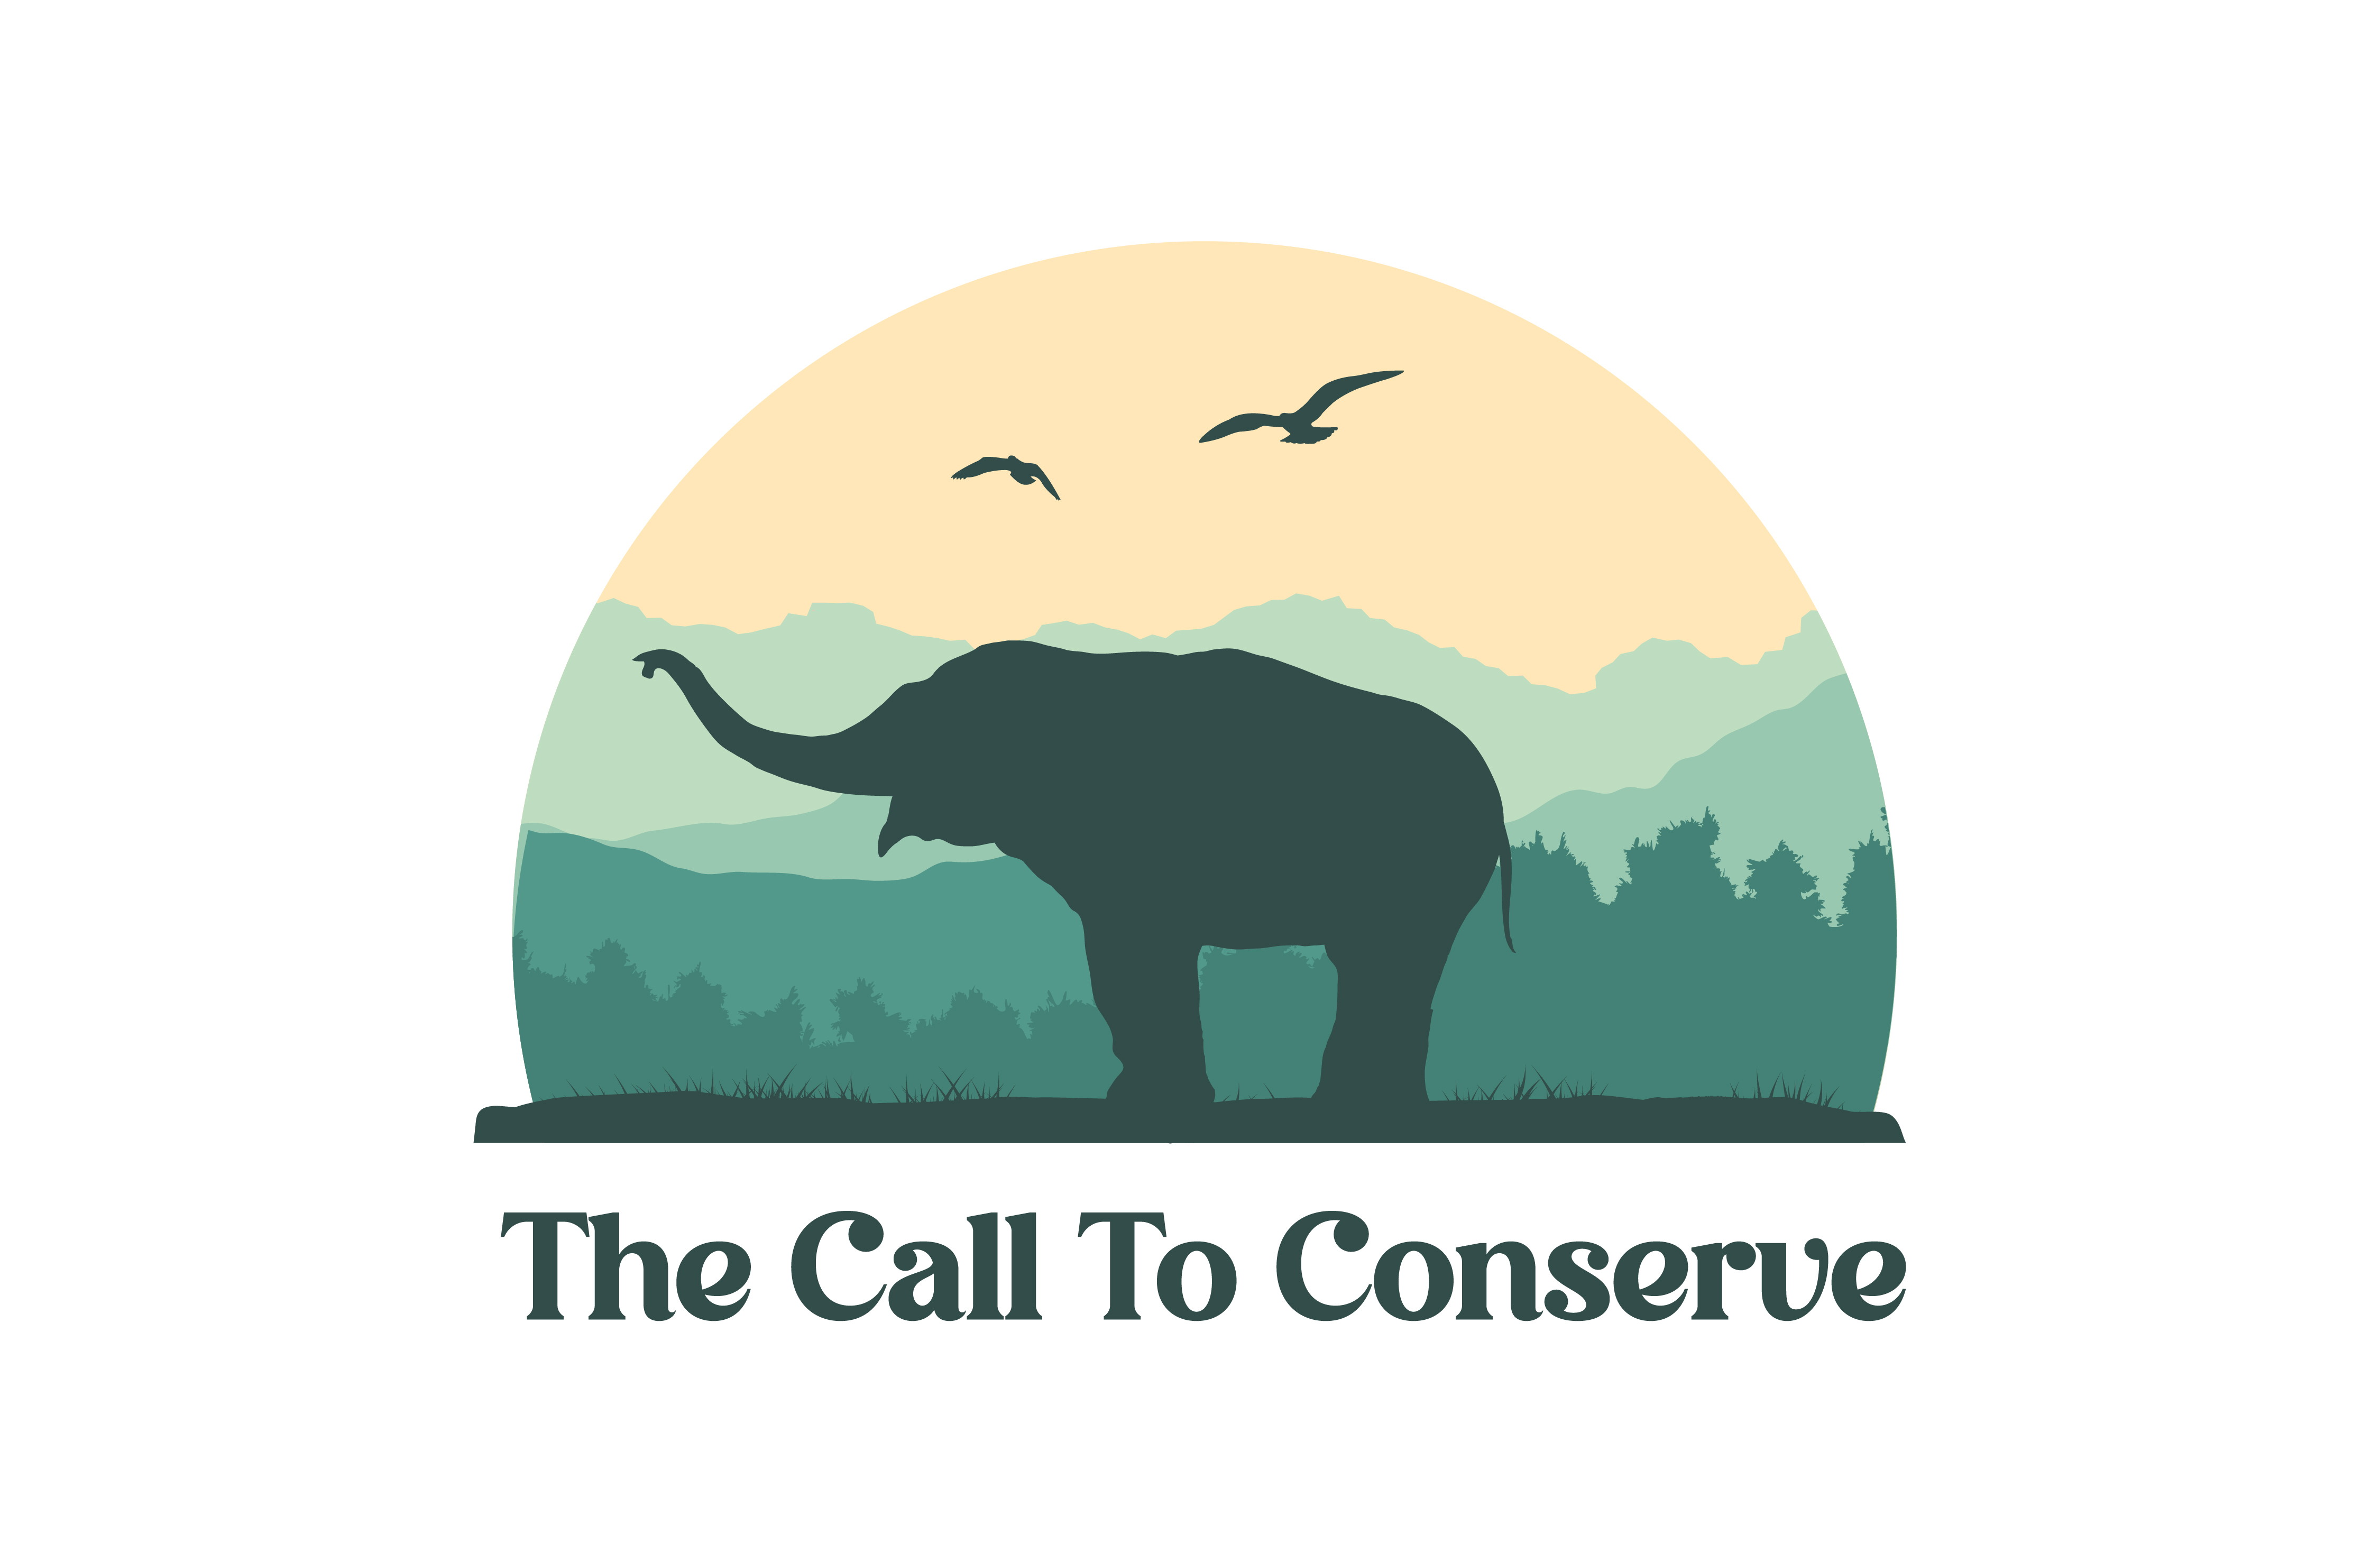 The Call to Conserve logo